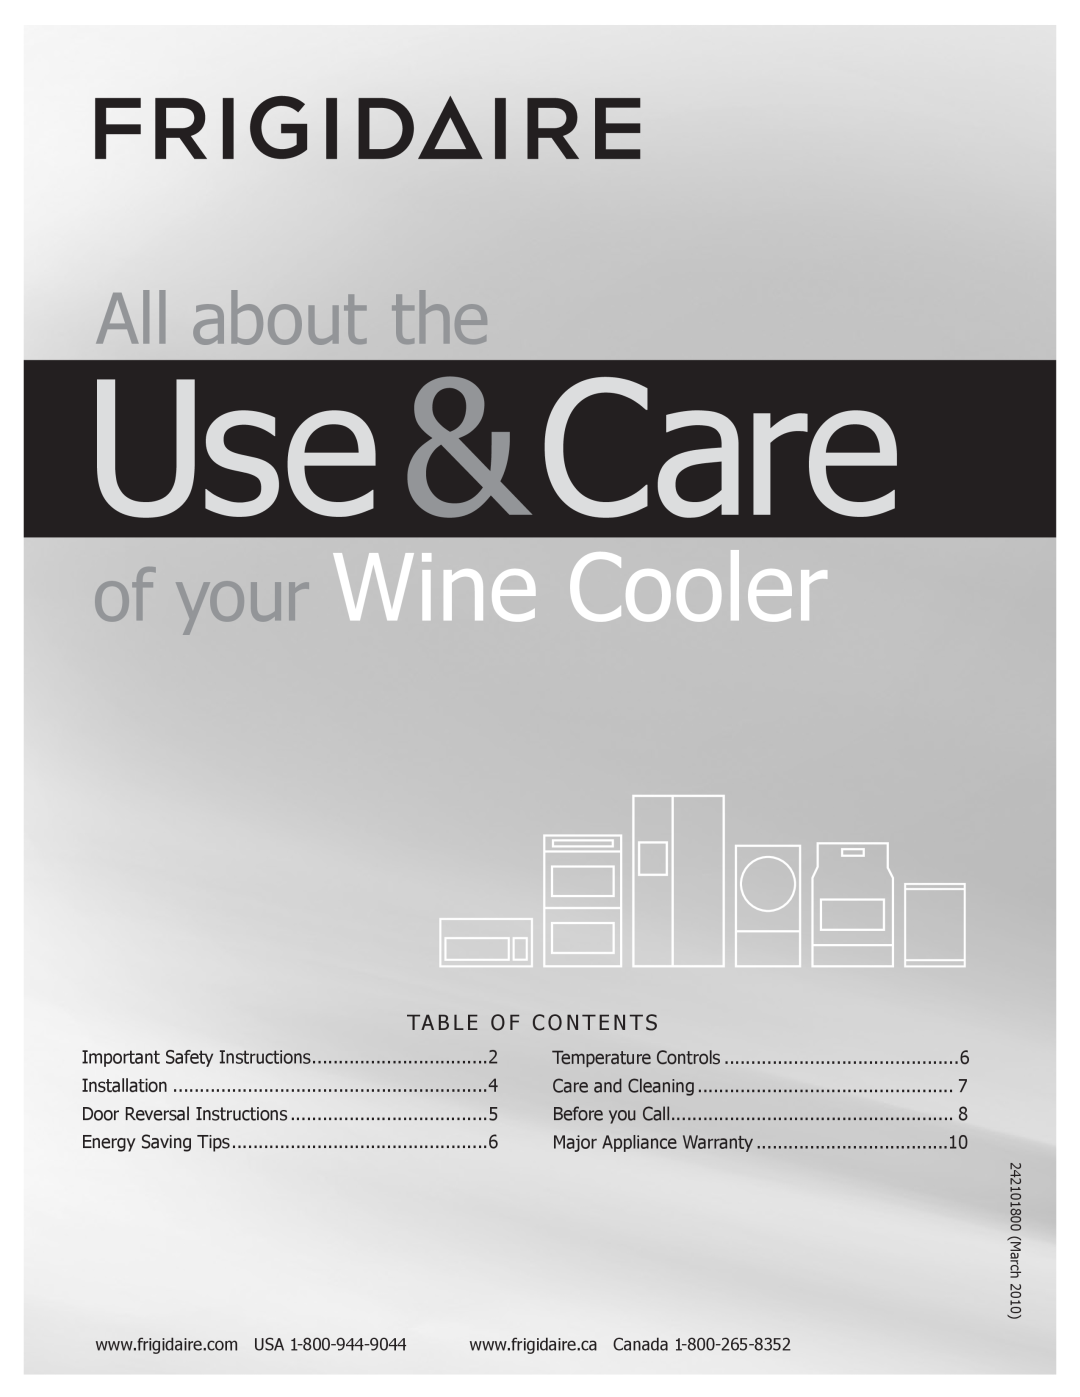 Frigidaire 242101800 important safety instructions Use &Care, of your Wine Cooler, All about the 